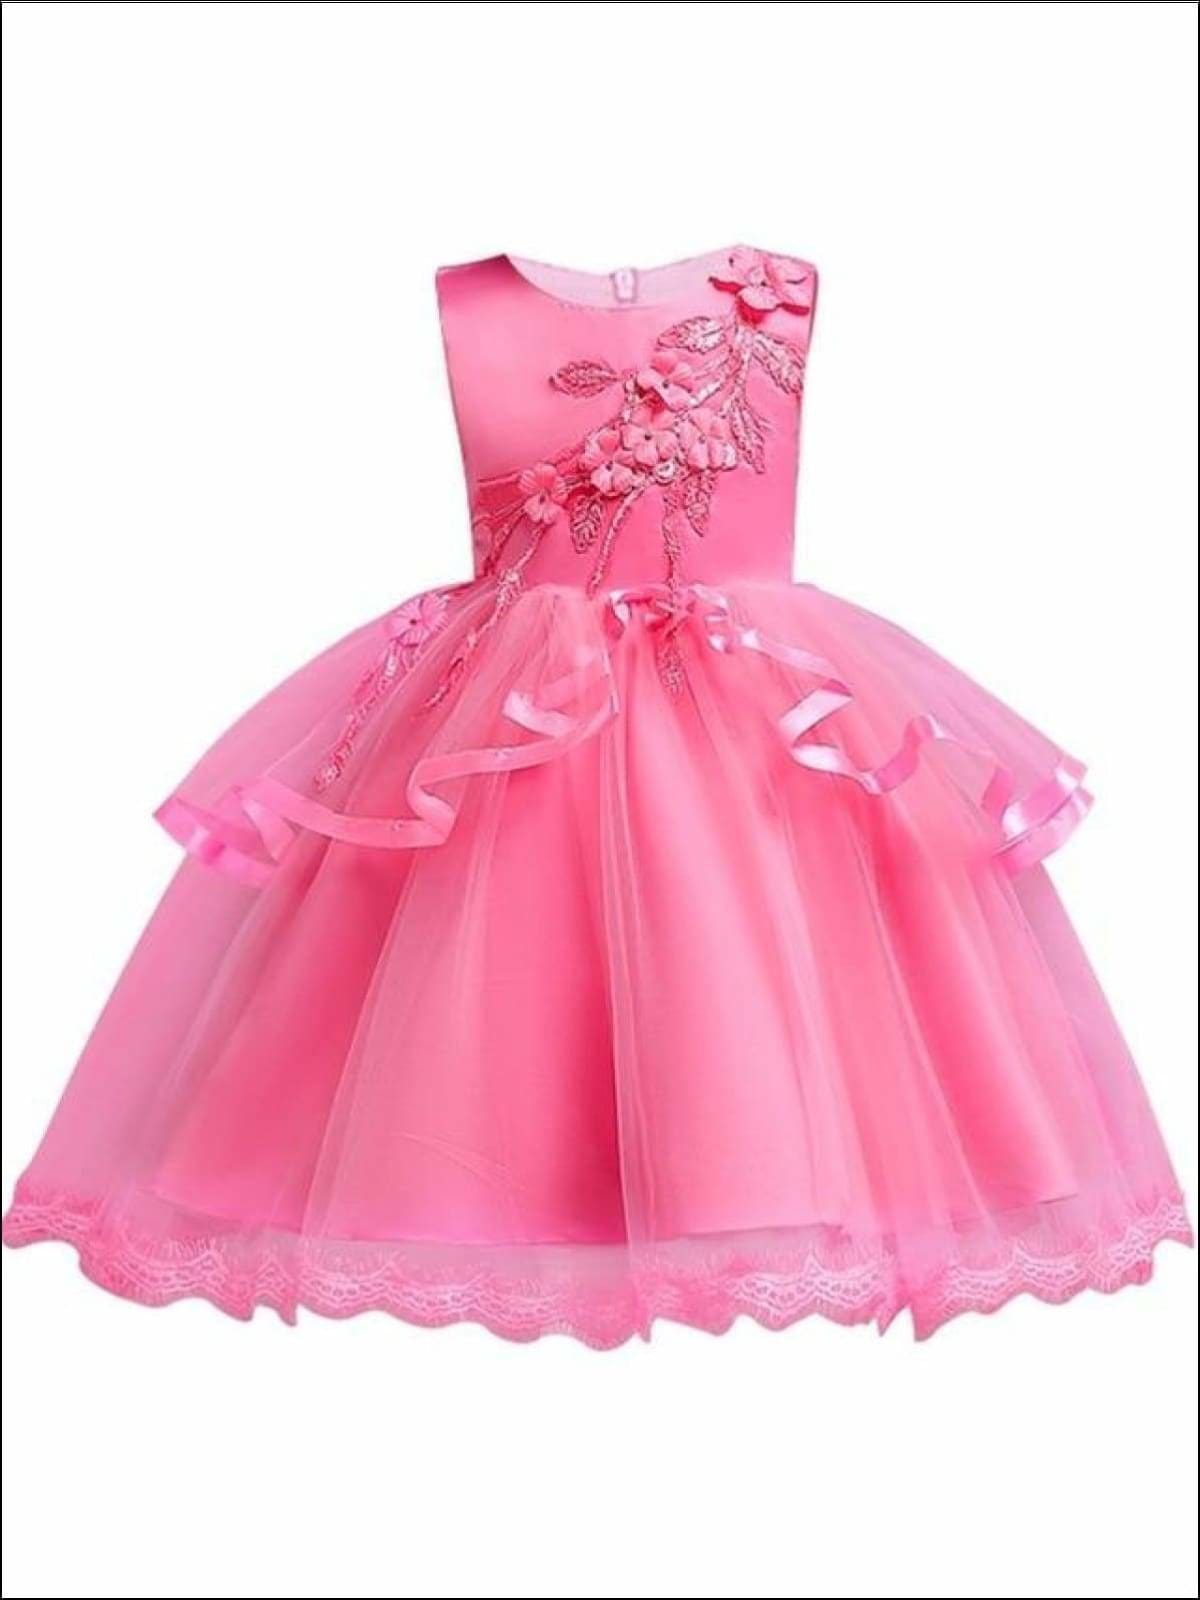 Girls Tiered Ruffle Flower Applique Special Occasion Dress - ROSE / 3T - Girls Dressy Dresses